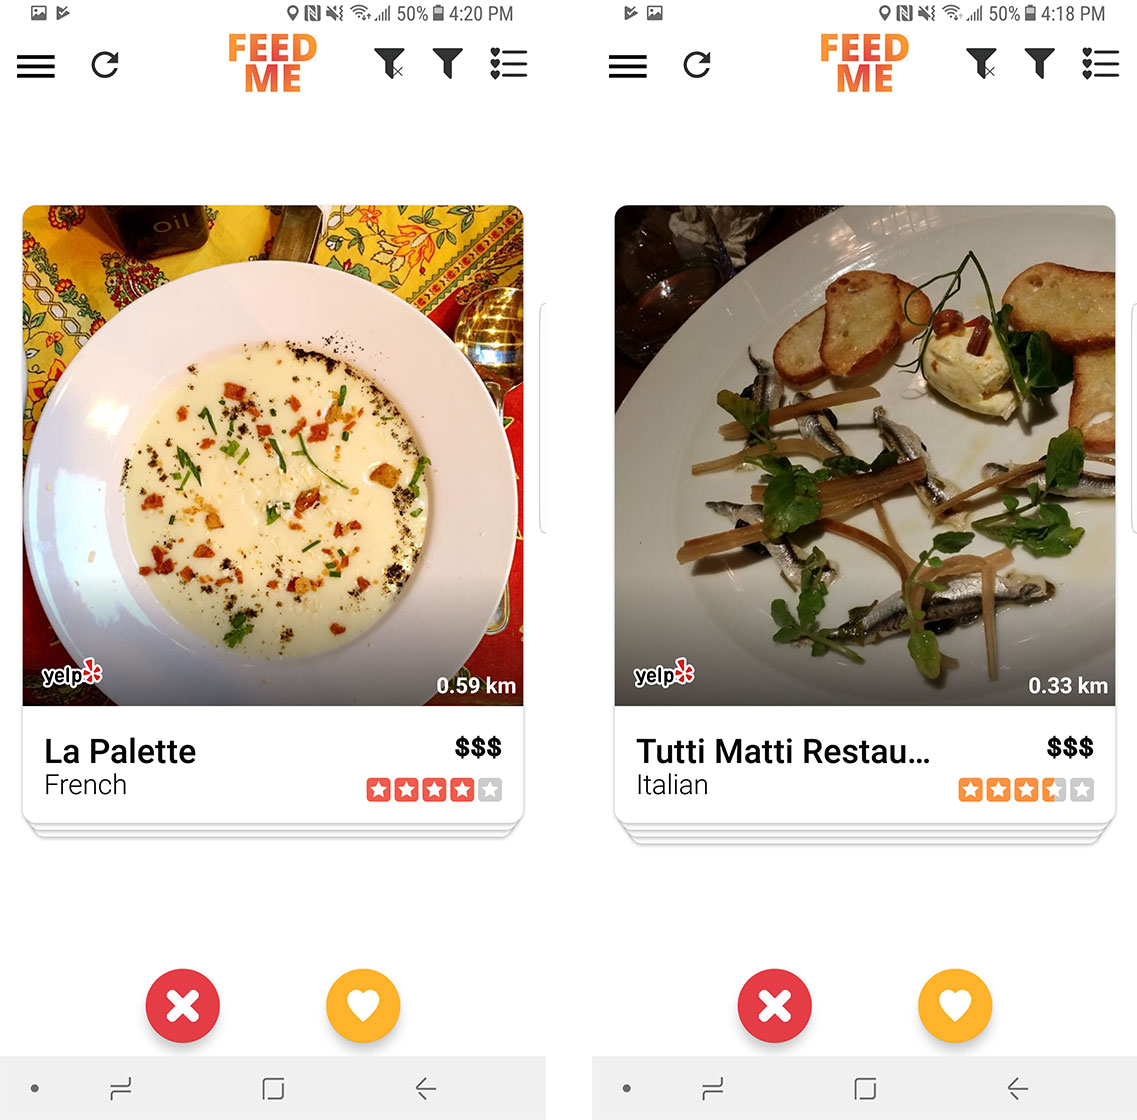 An image showing the swipe interface on Feed Me